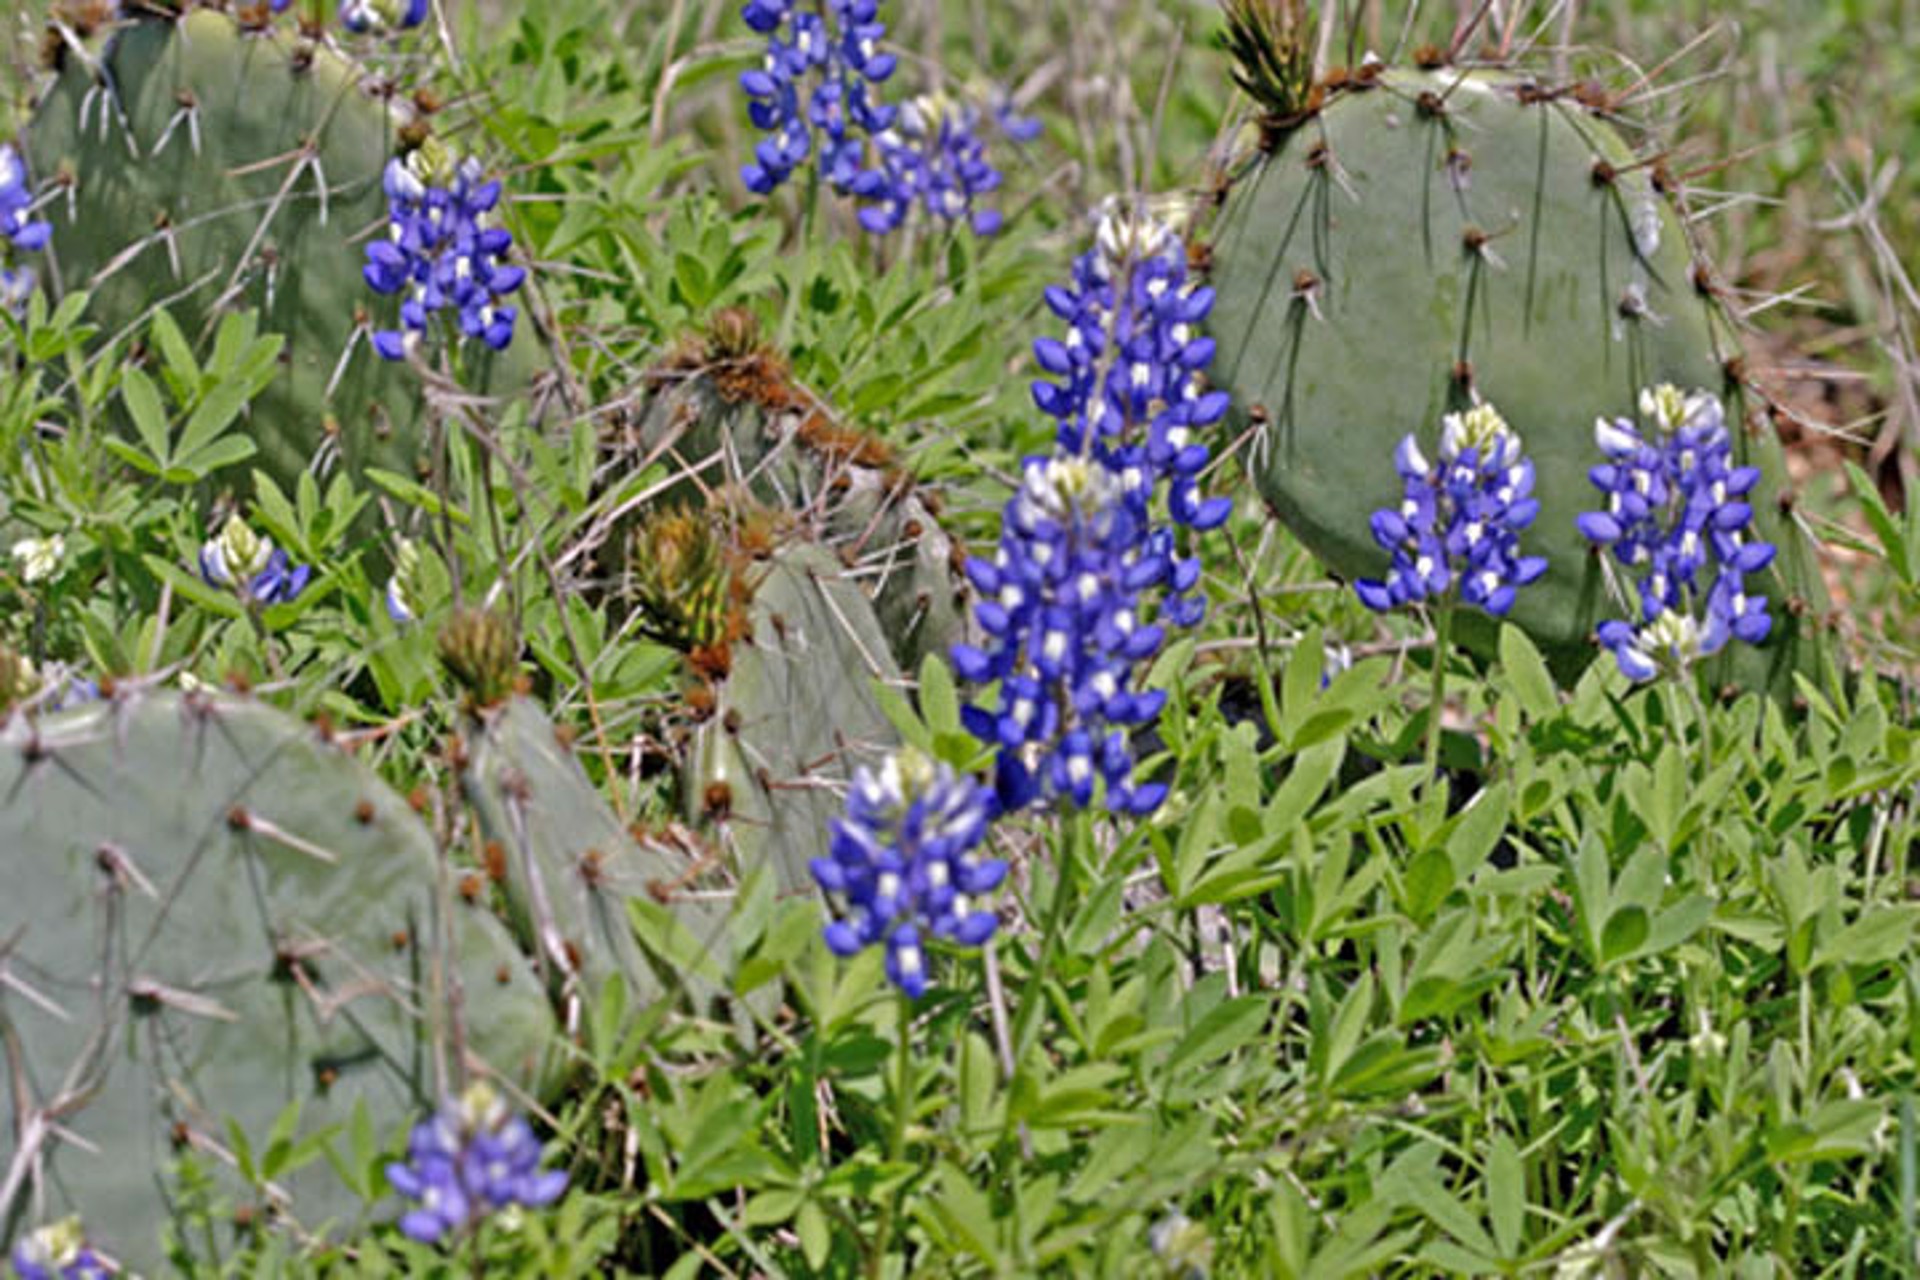 Spring Bluebonnets and Cactus by Rob Pitzer's Private Collection